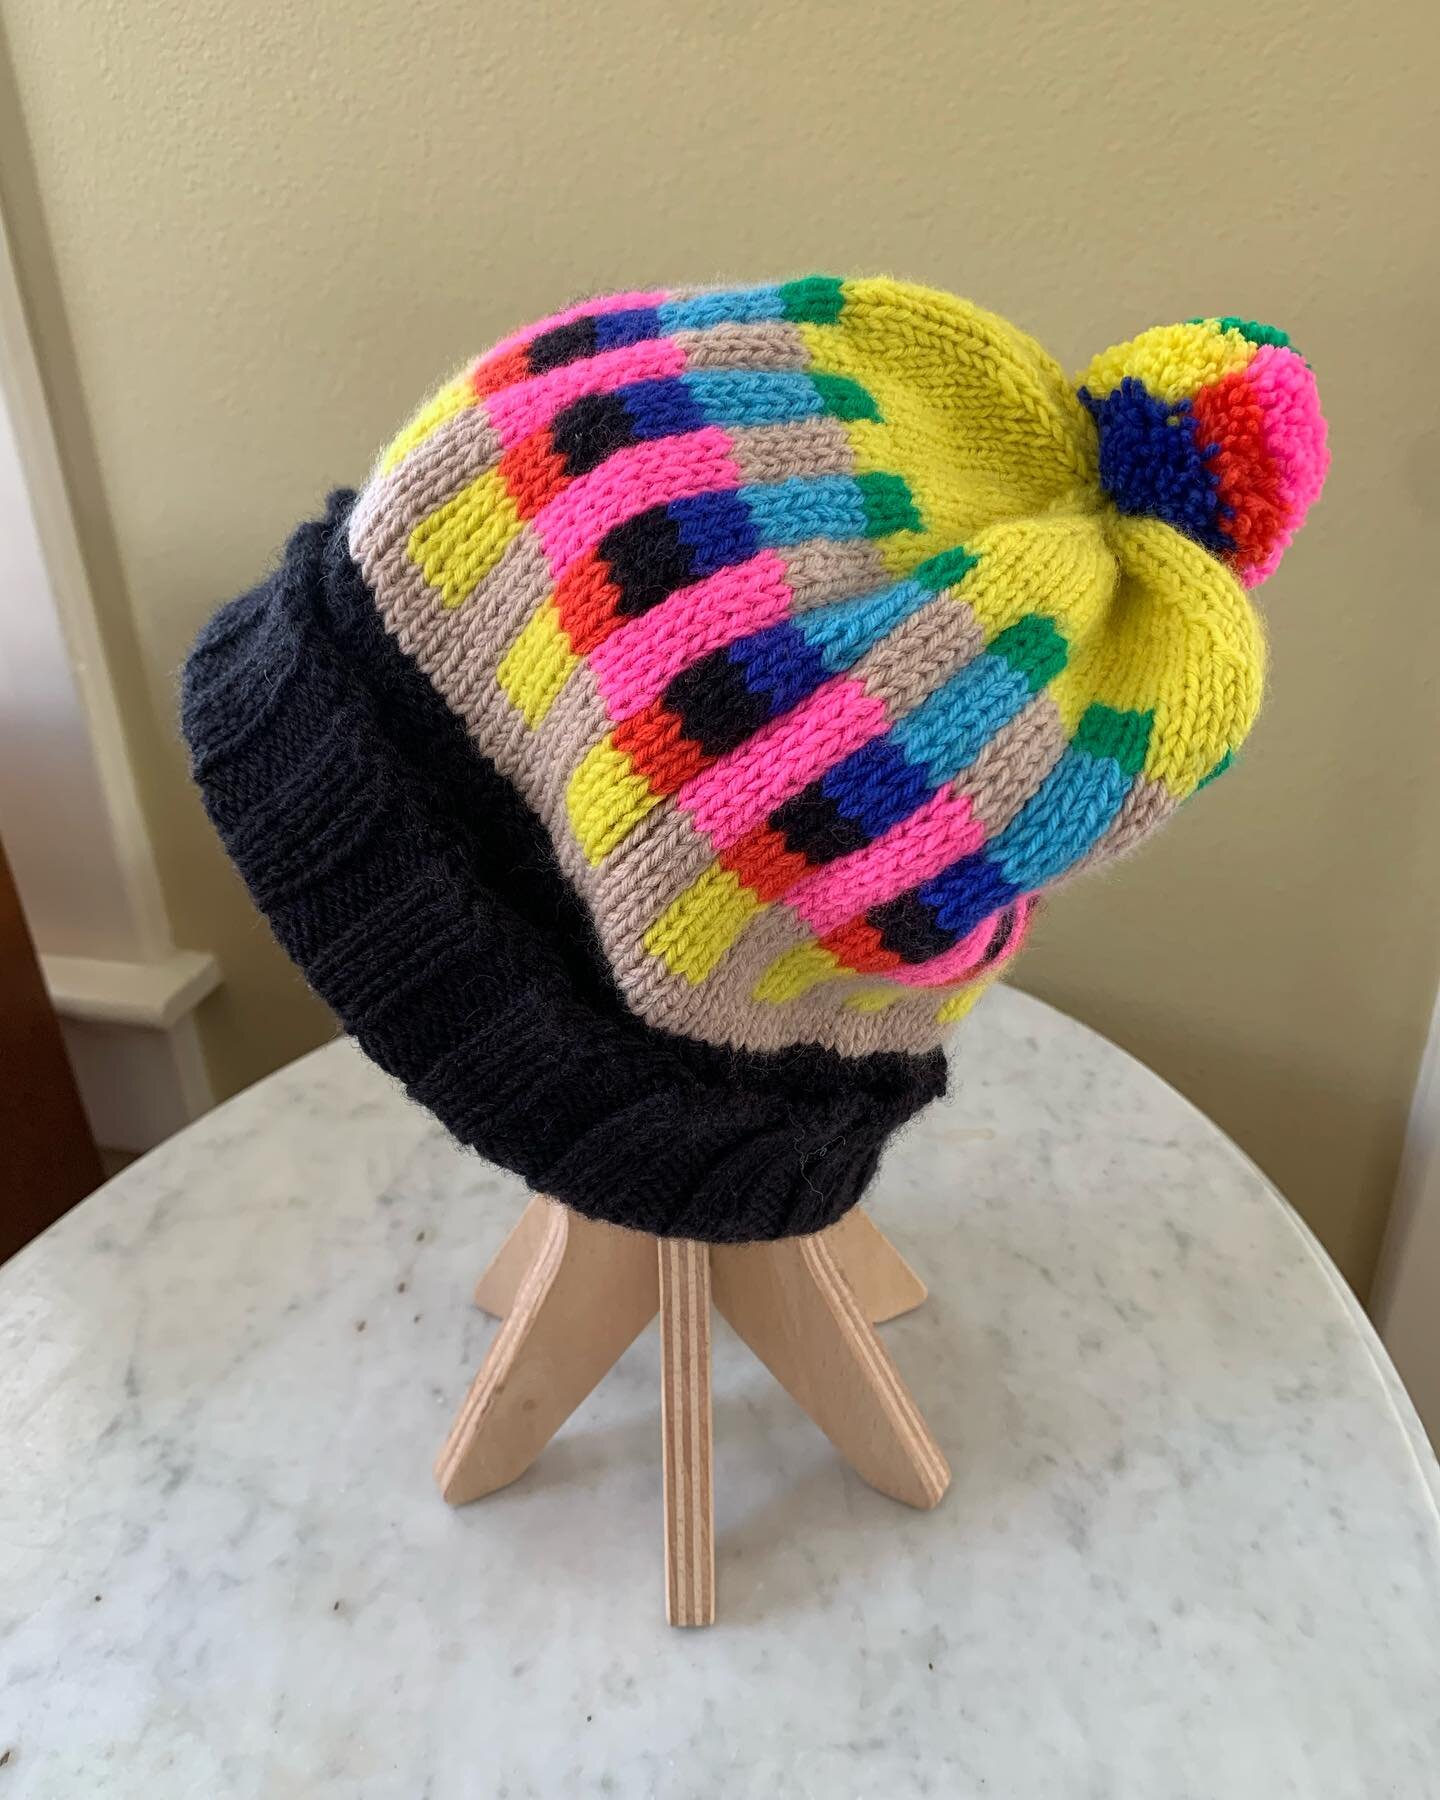 The Colourbar by @kindred.red knit up in @kaosyarn. Perfect for today. Fun, easy colorwork and no catching floats!  #hat #pompoms  #maker #makersgonnamake  #doers  #create #craft #colorworkknitting  #yourfavorite  #lys #fortcollins  #hatweather  #nev